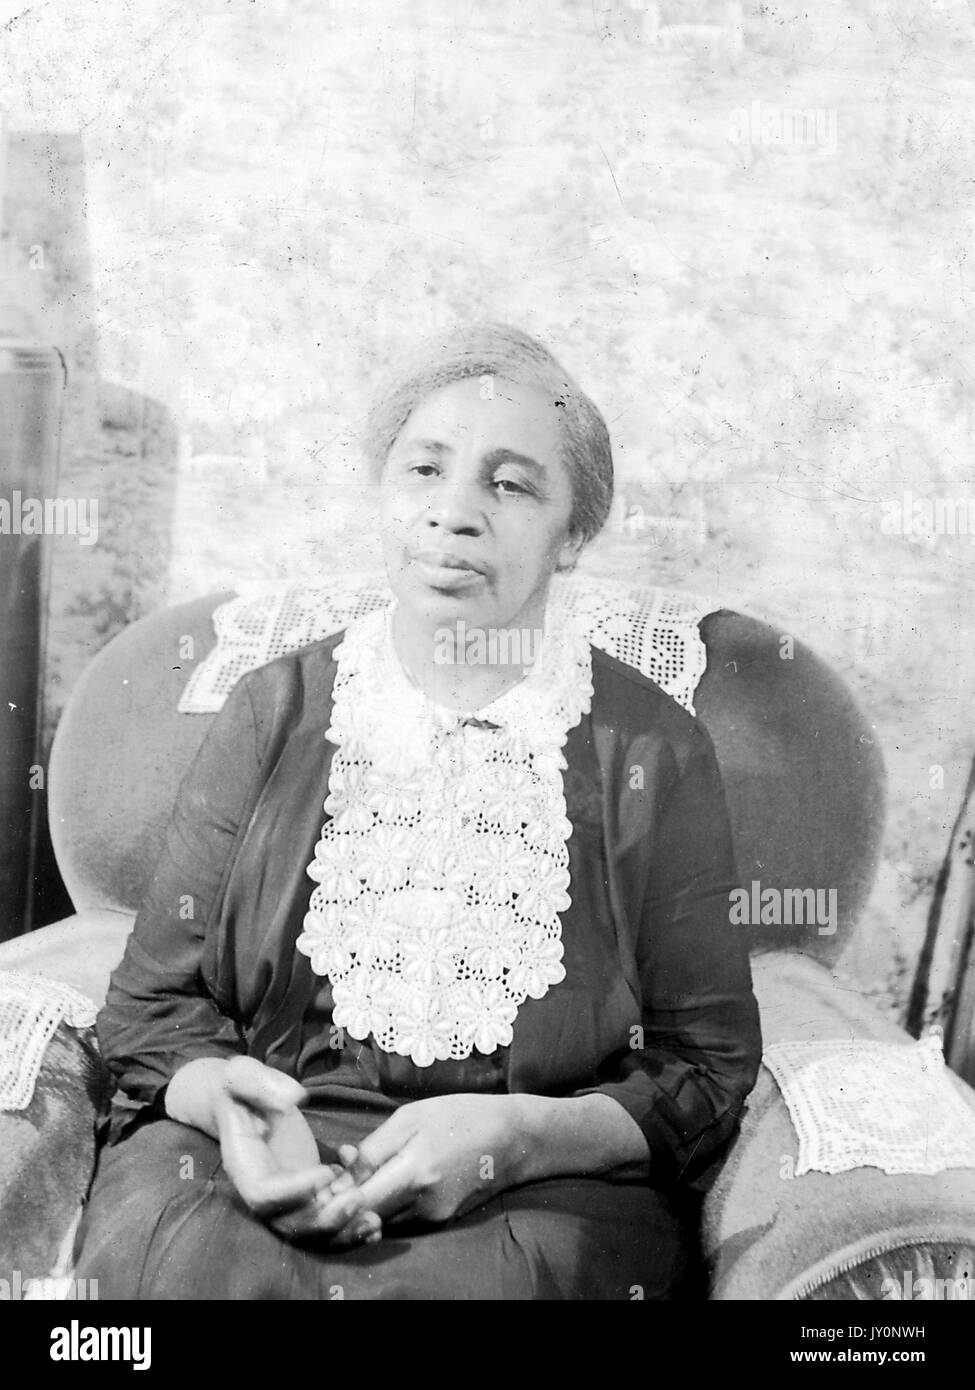 Half-body portrait of African American woman, seated in an arm chair, with her hands on her lap, wearing a dark dress, in front of a backdrop, with a serious facial expression, 1920. Stock Photo